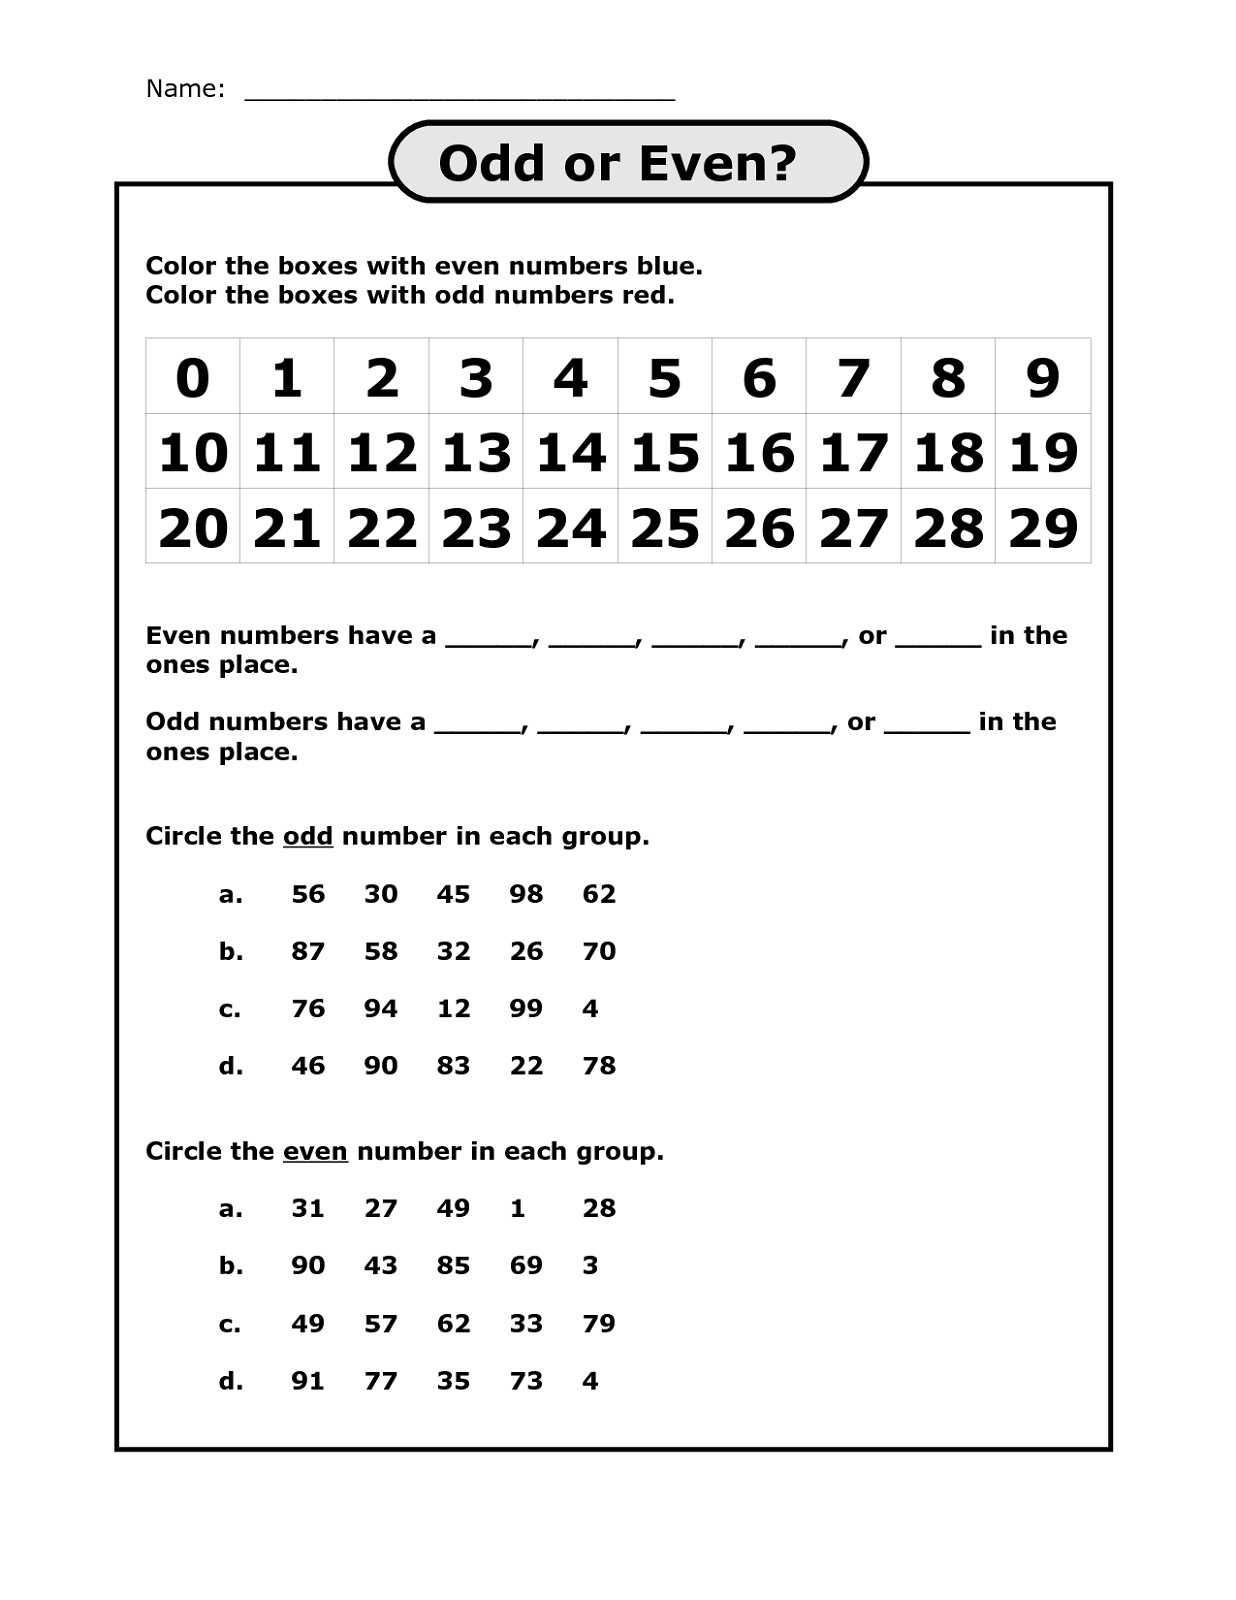 Mental Health Group Worksheets and Odd and even Numbers Up to 10 Worksheet Refrence Math Worksheets for